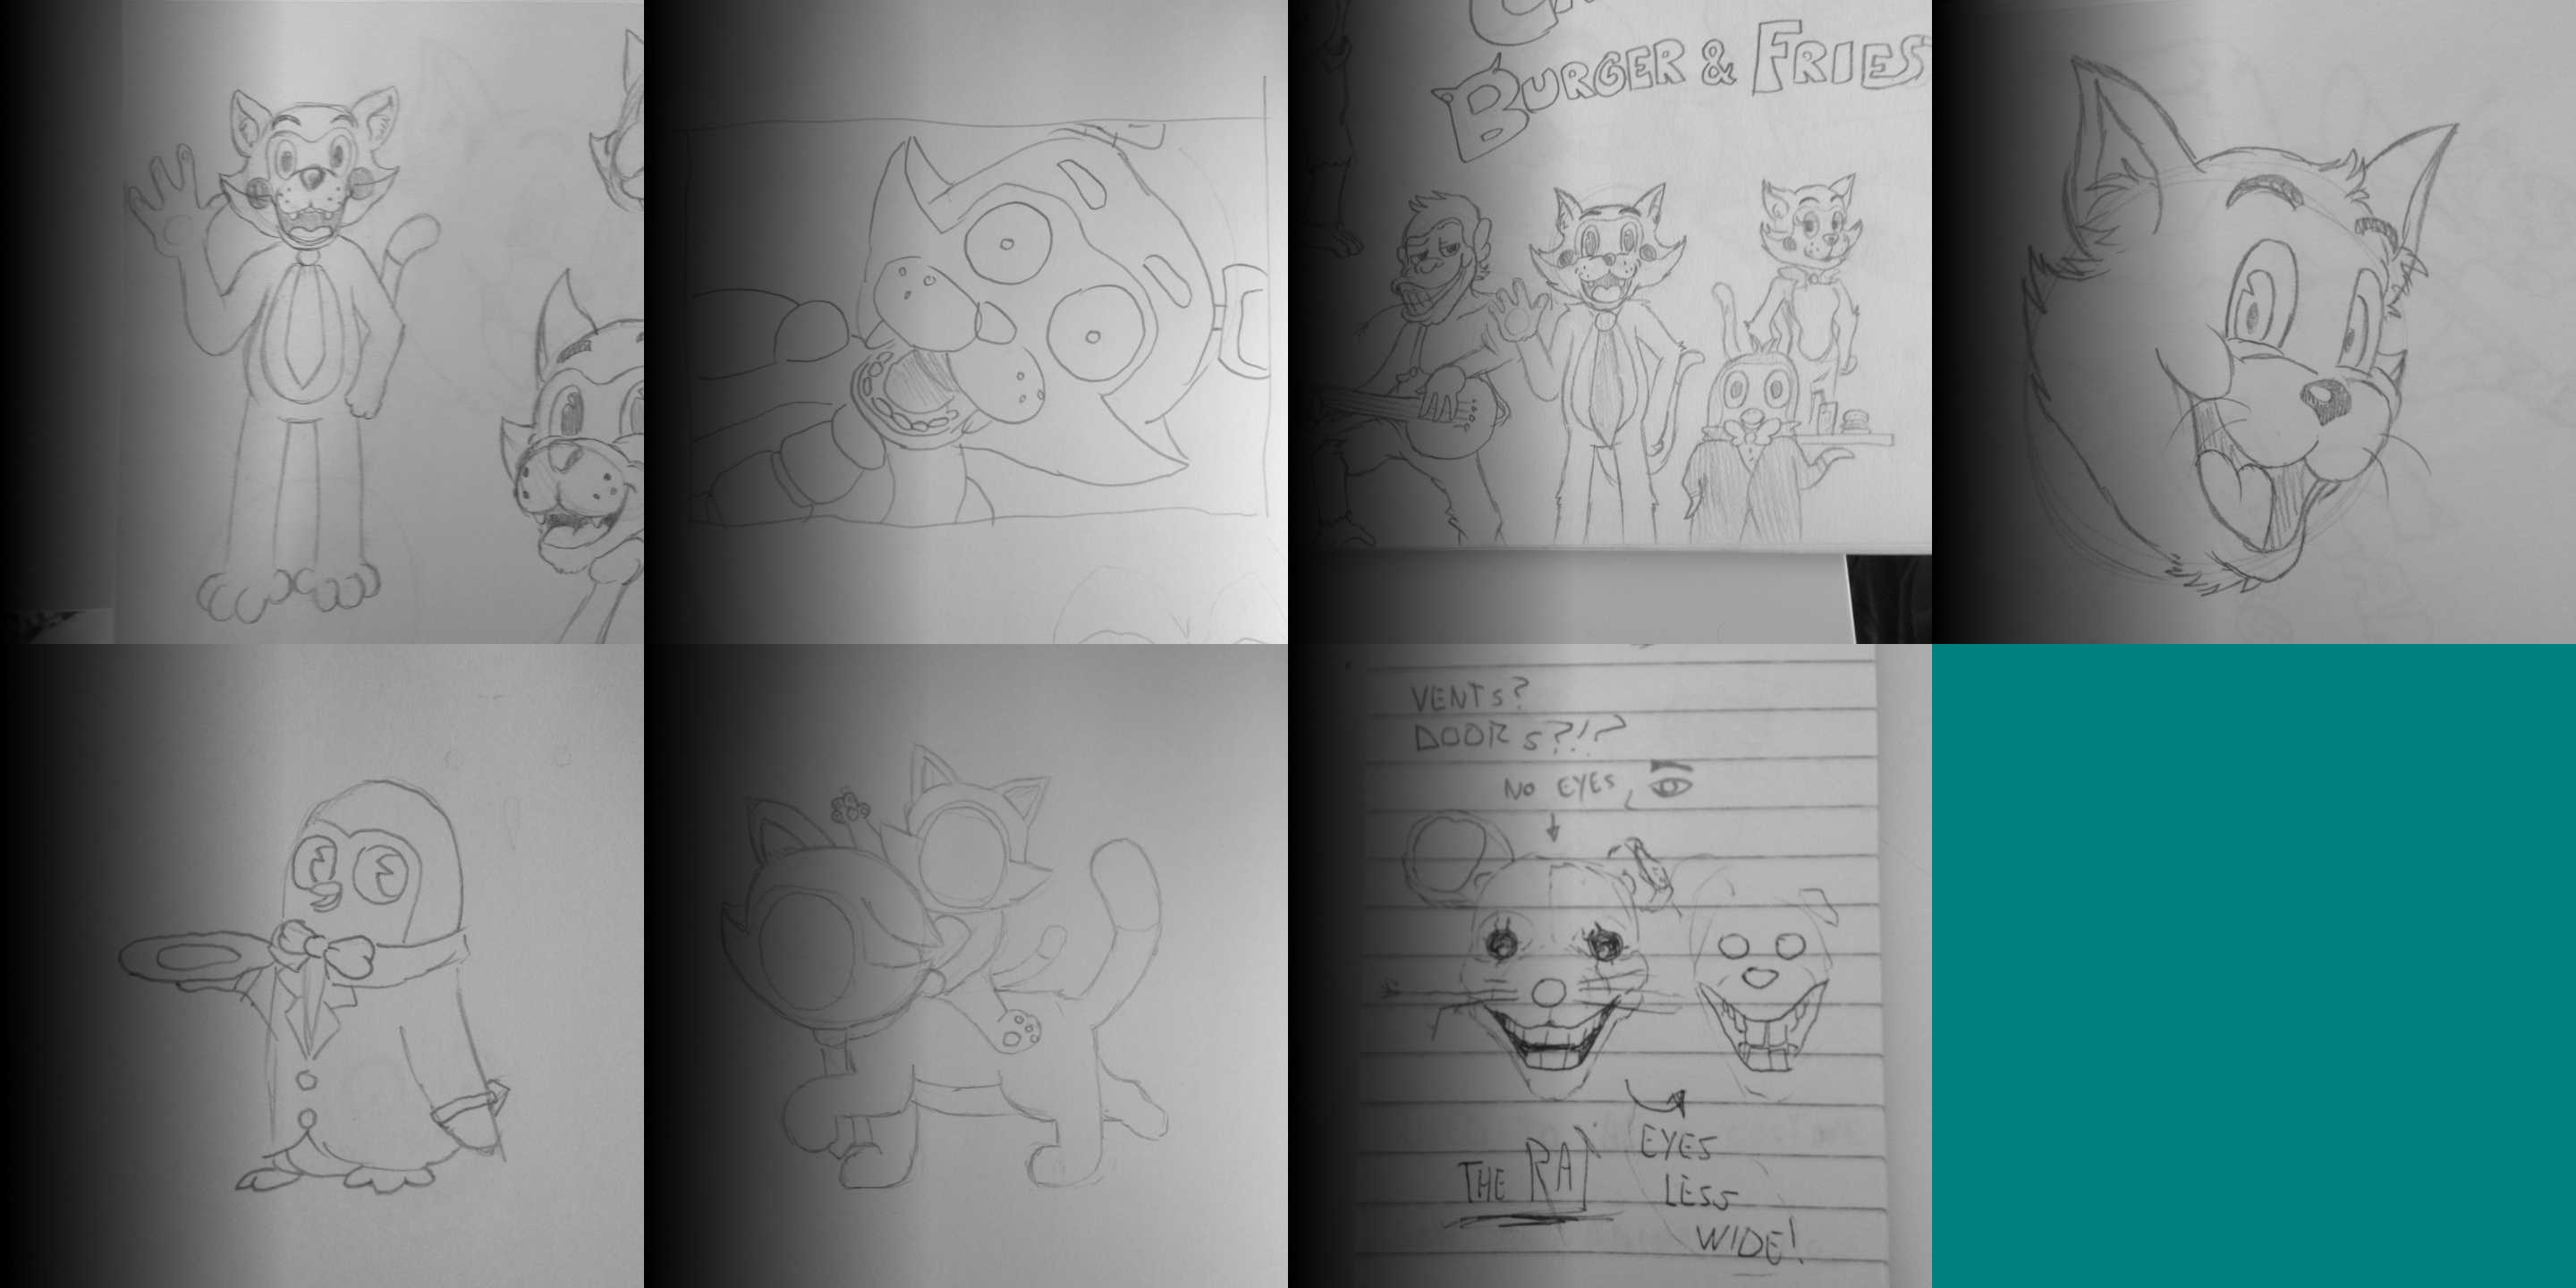 Five Nights at Candy's - Notebook Pages